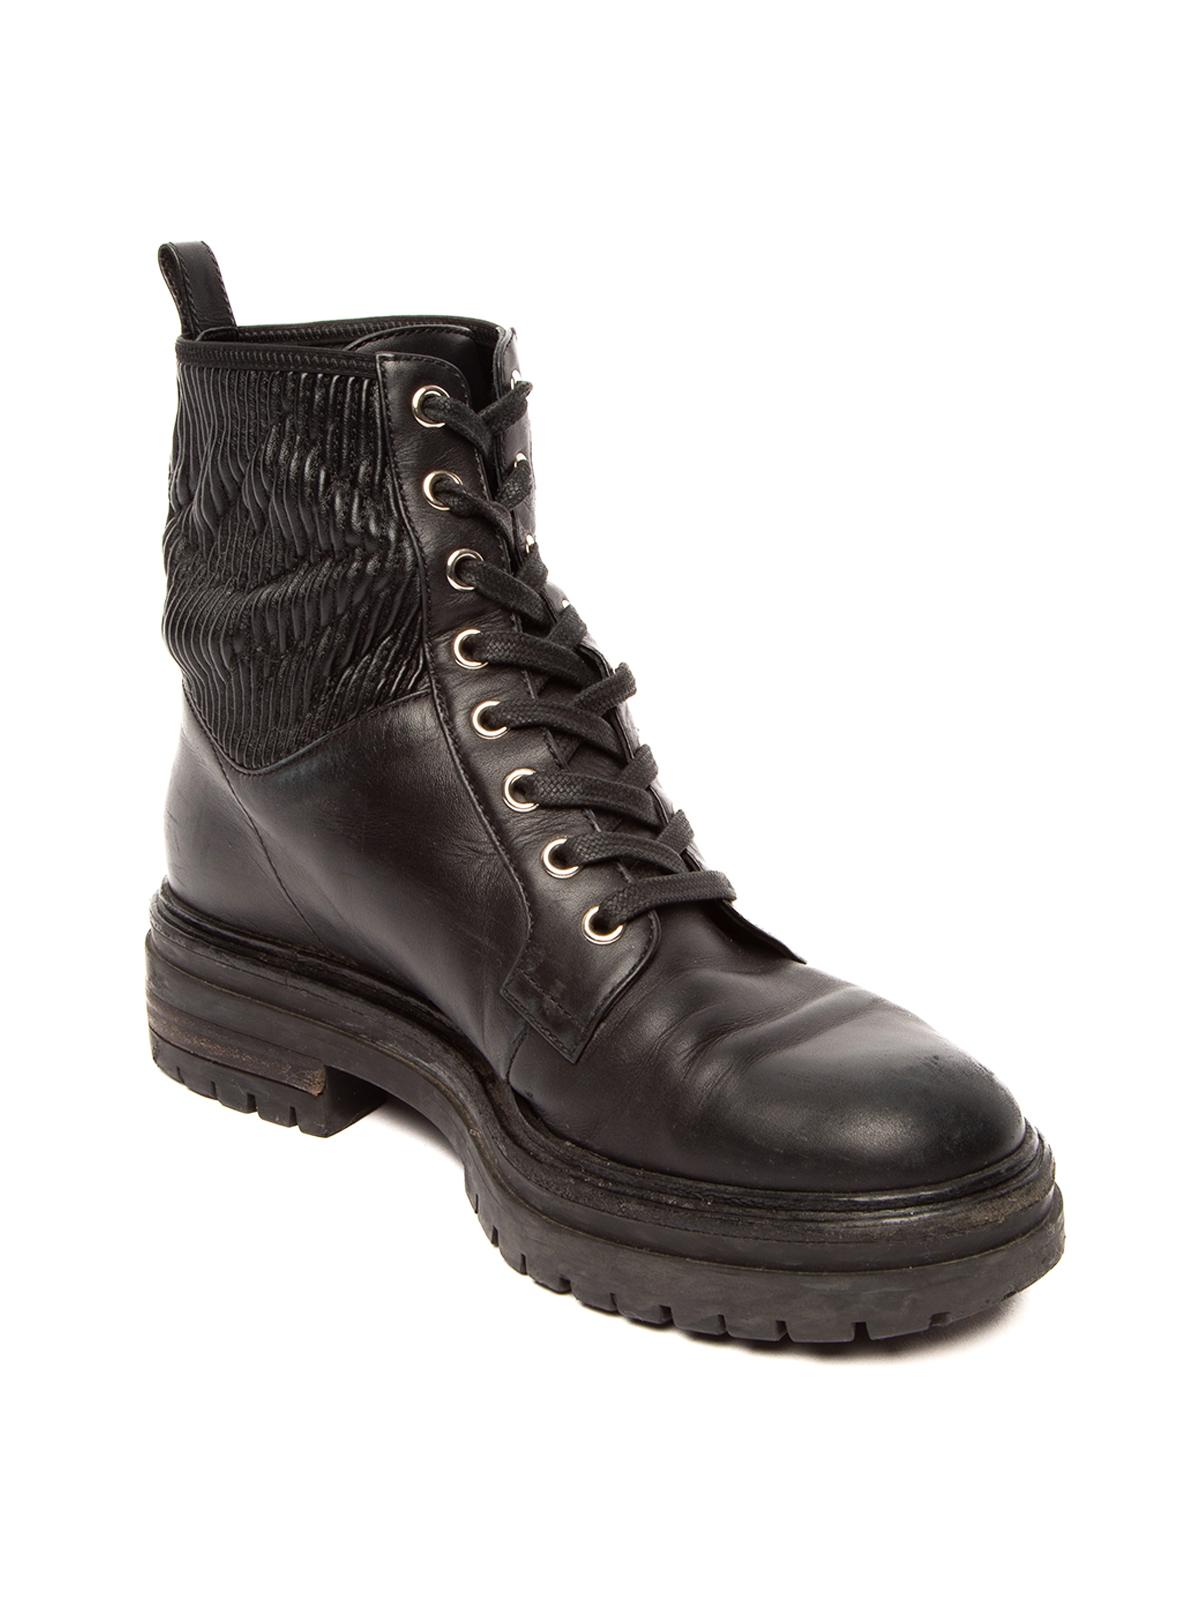 CONDITION is good. Minor wear on the toe box and sides\' external leather. Signs of decoloration on the enternal soles. Details Black Leather Lace-up front Side Ribbed Leather Panels Made In Italy Composition Leather Size 38. 5 EU, UK 5. 5, US 8. 5